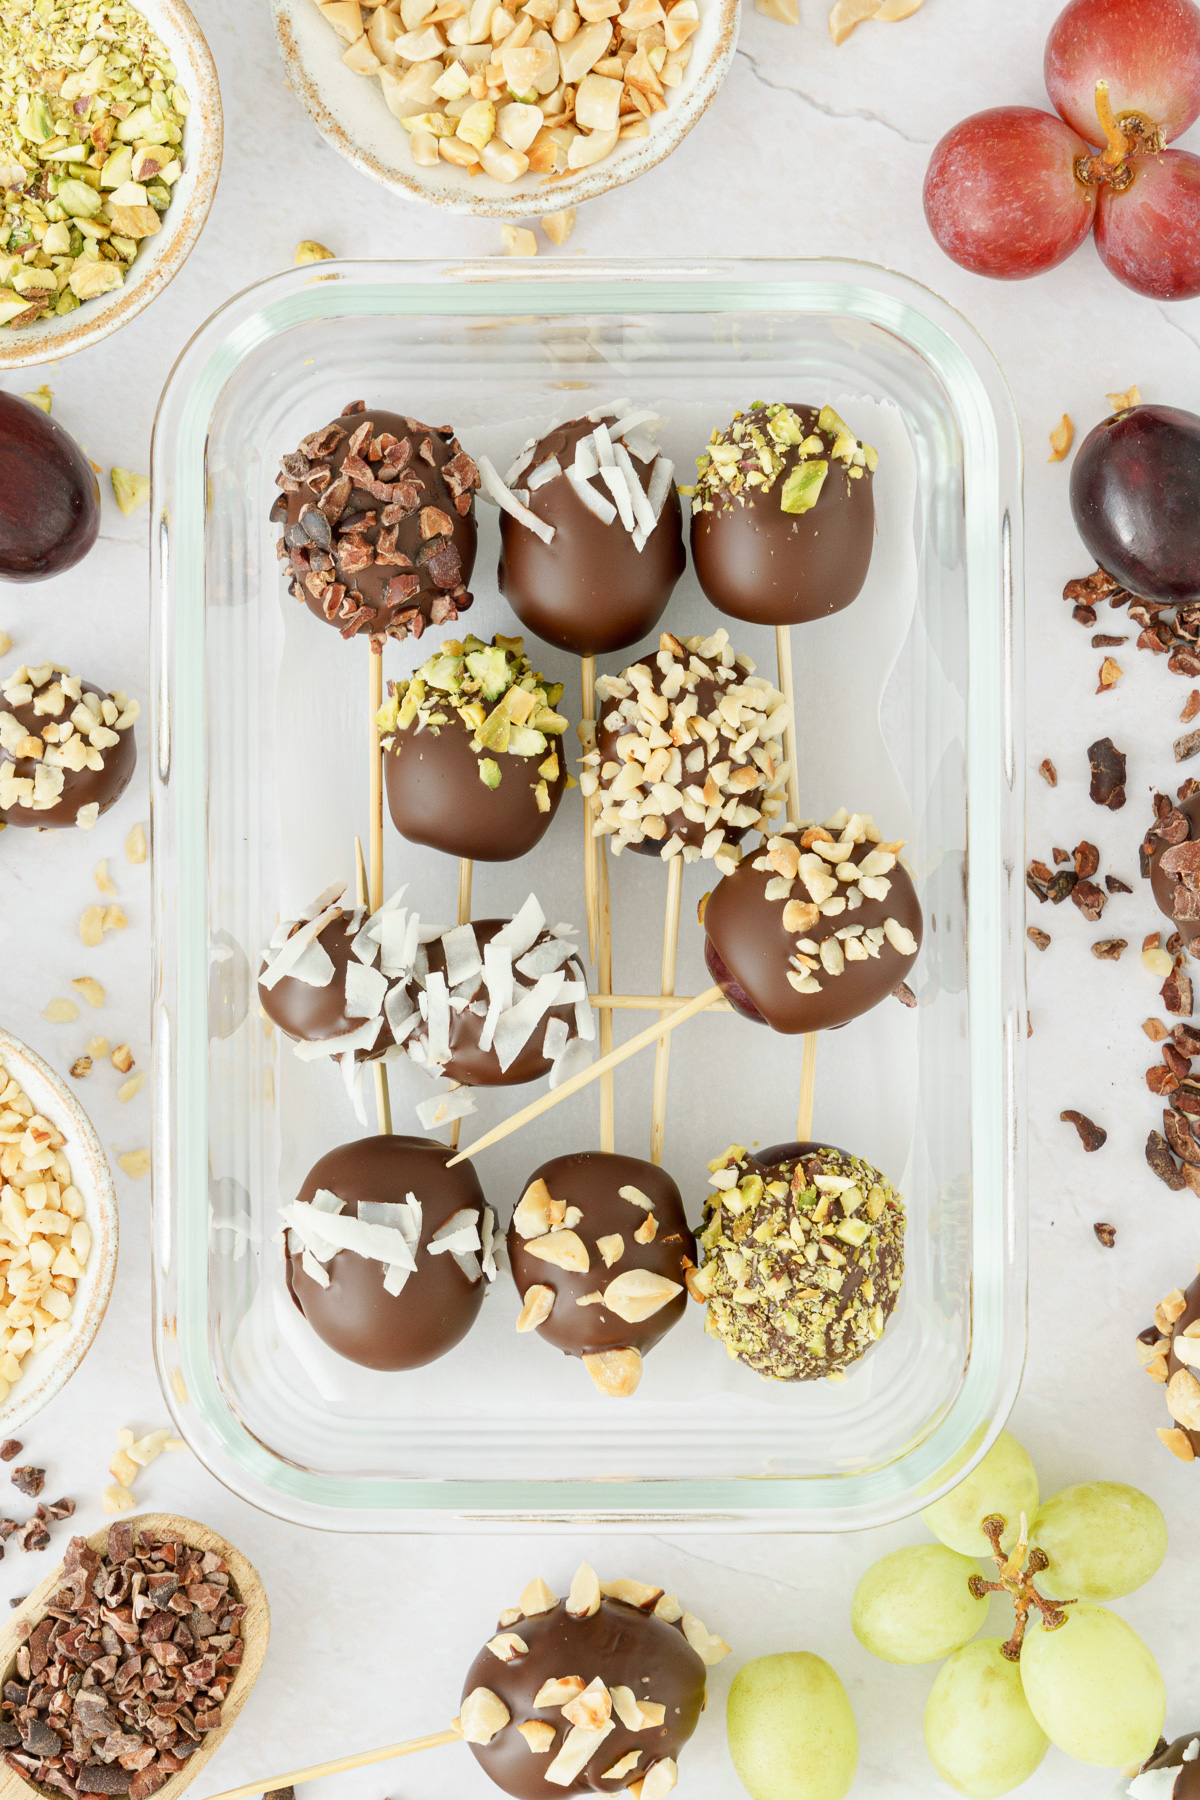 Glass container with chocolate-covered grapes with various toppings ready for storage.